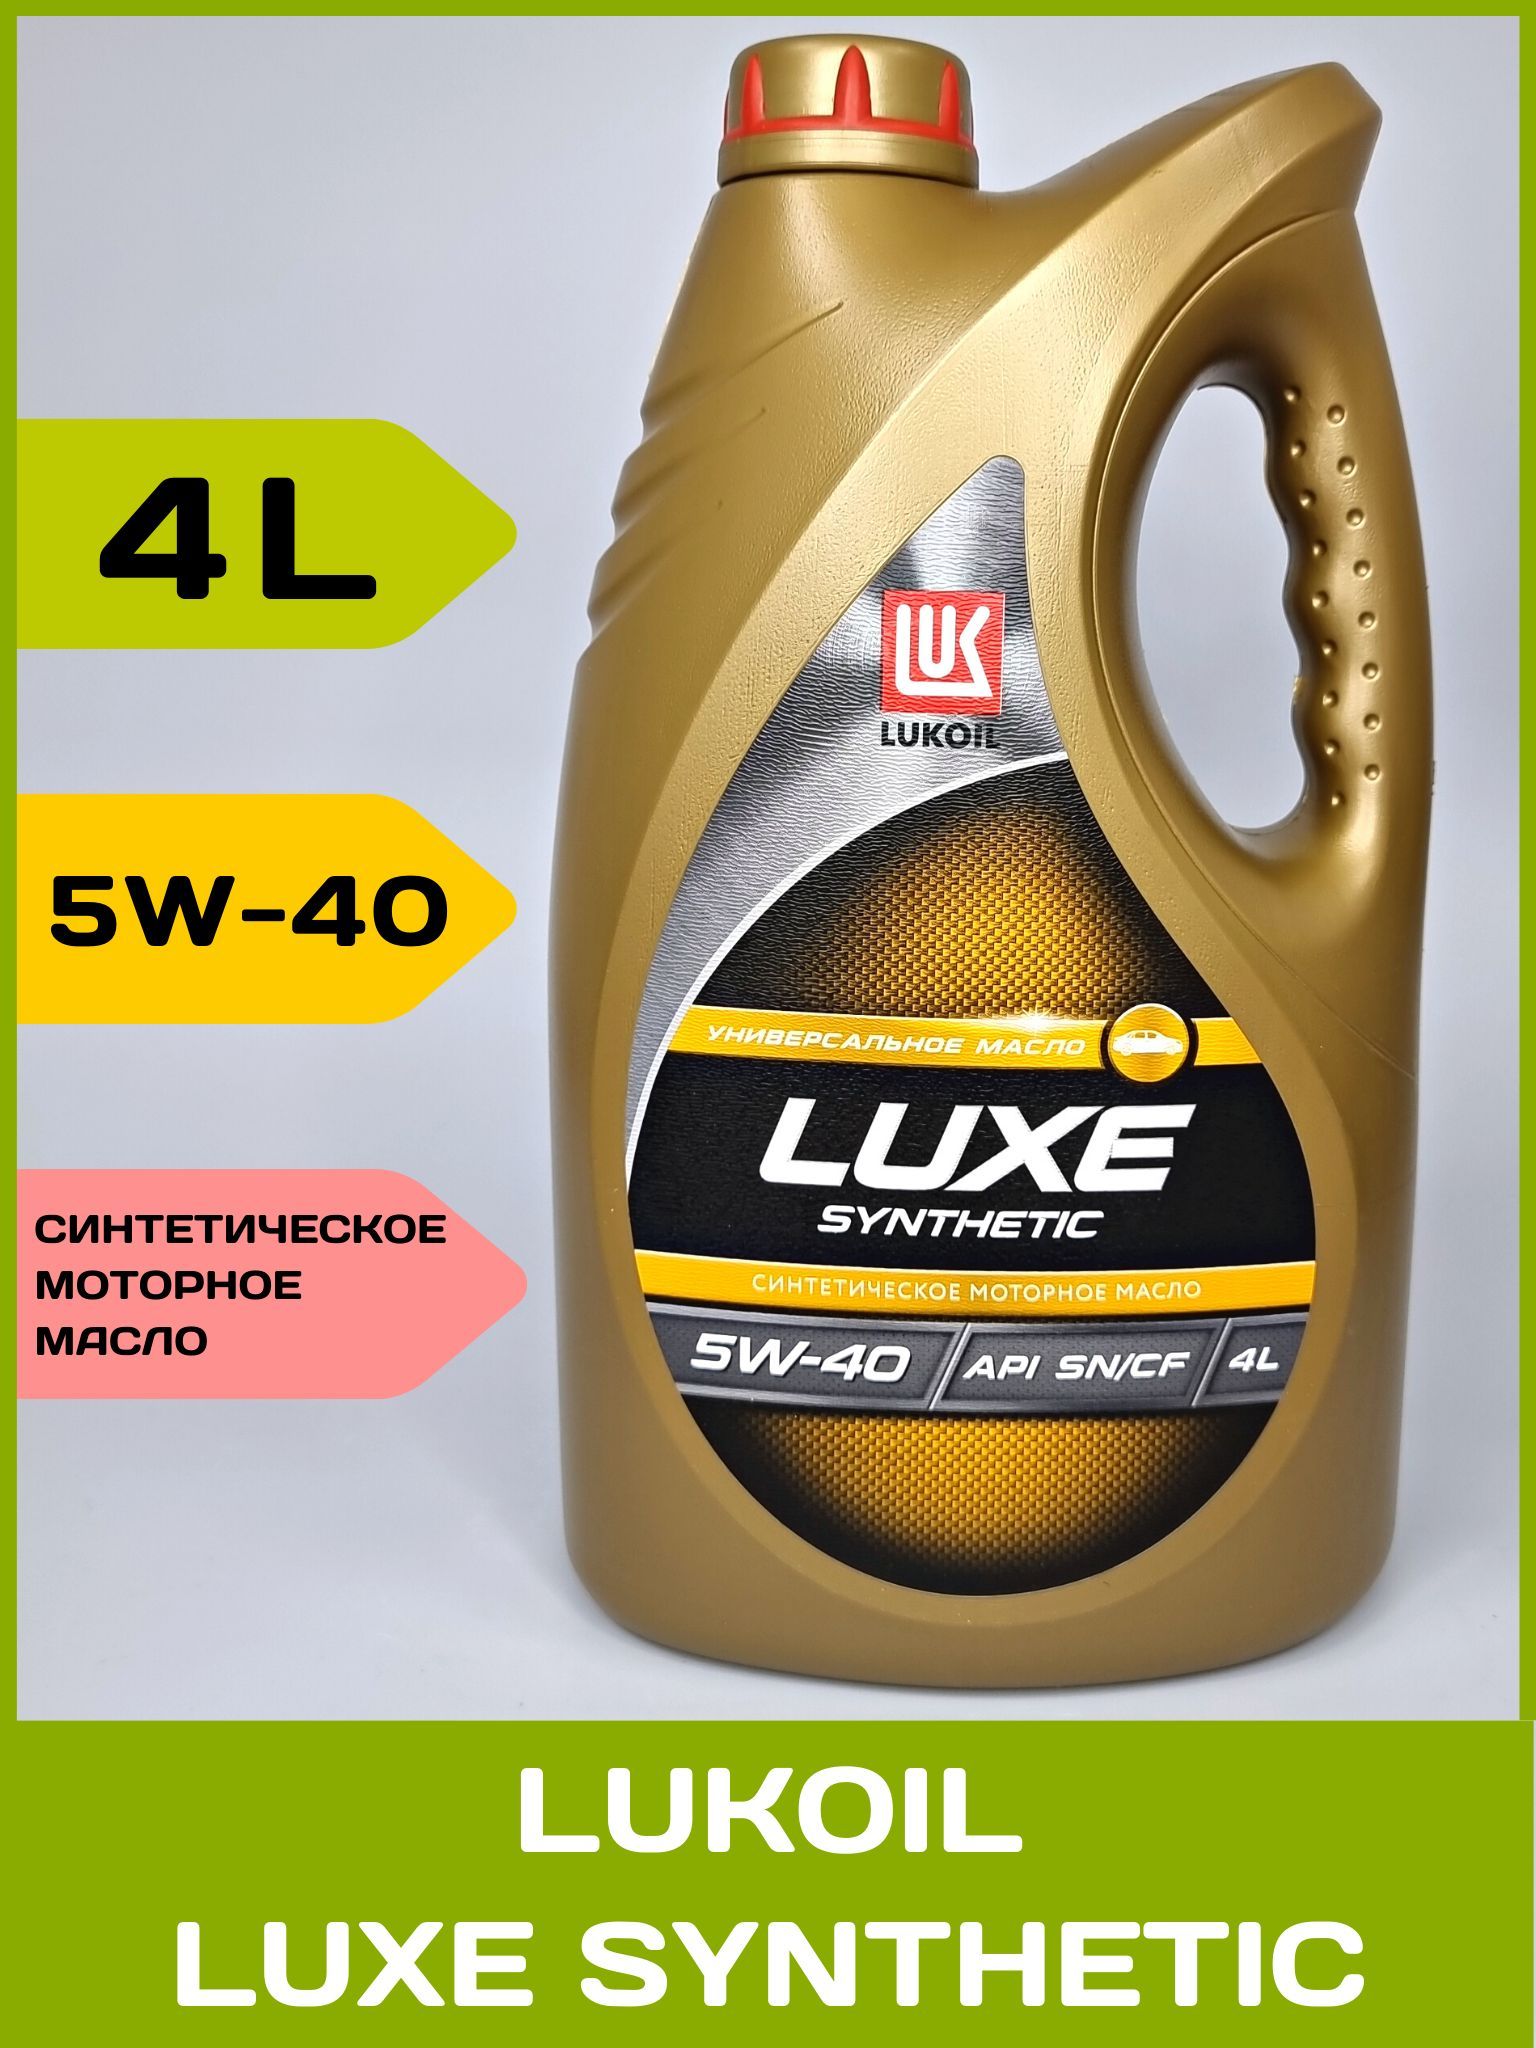 Лукойл 5 40 отзывы. Lukoil Luxe Synthetic 5w-30. Автомасло Лукойл Люкс моторное 5w-40 синтетика. Luxe Synthetic SL/CF 5w-30. Лукойл Люкс 5w30 синтетика 5л.